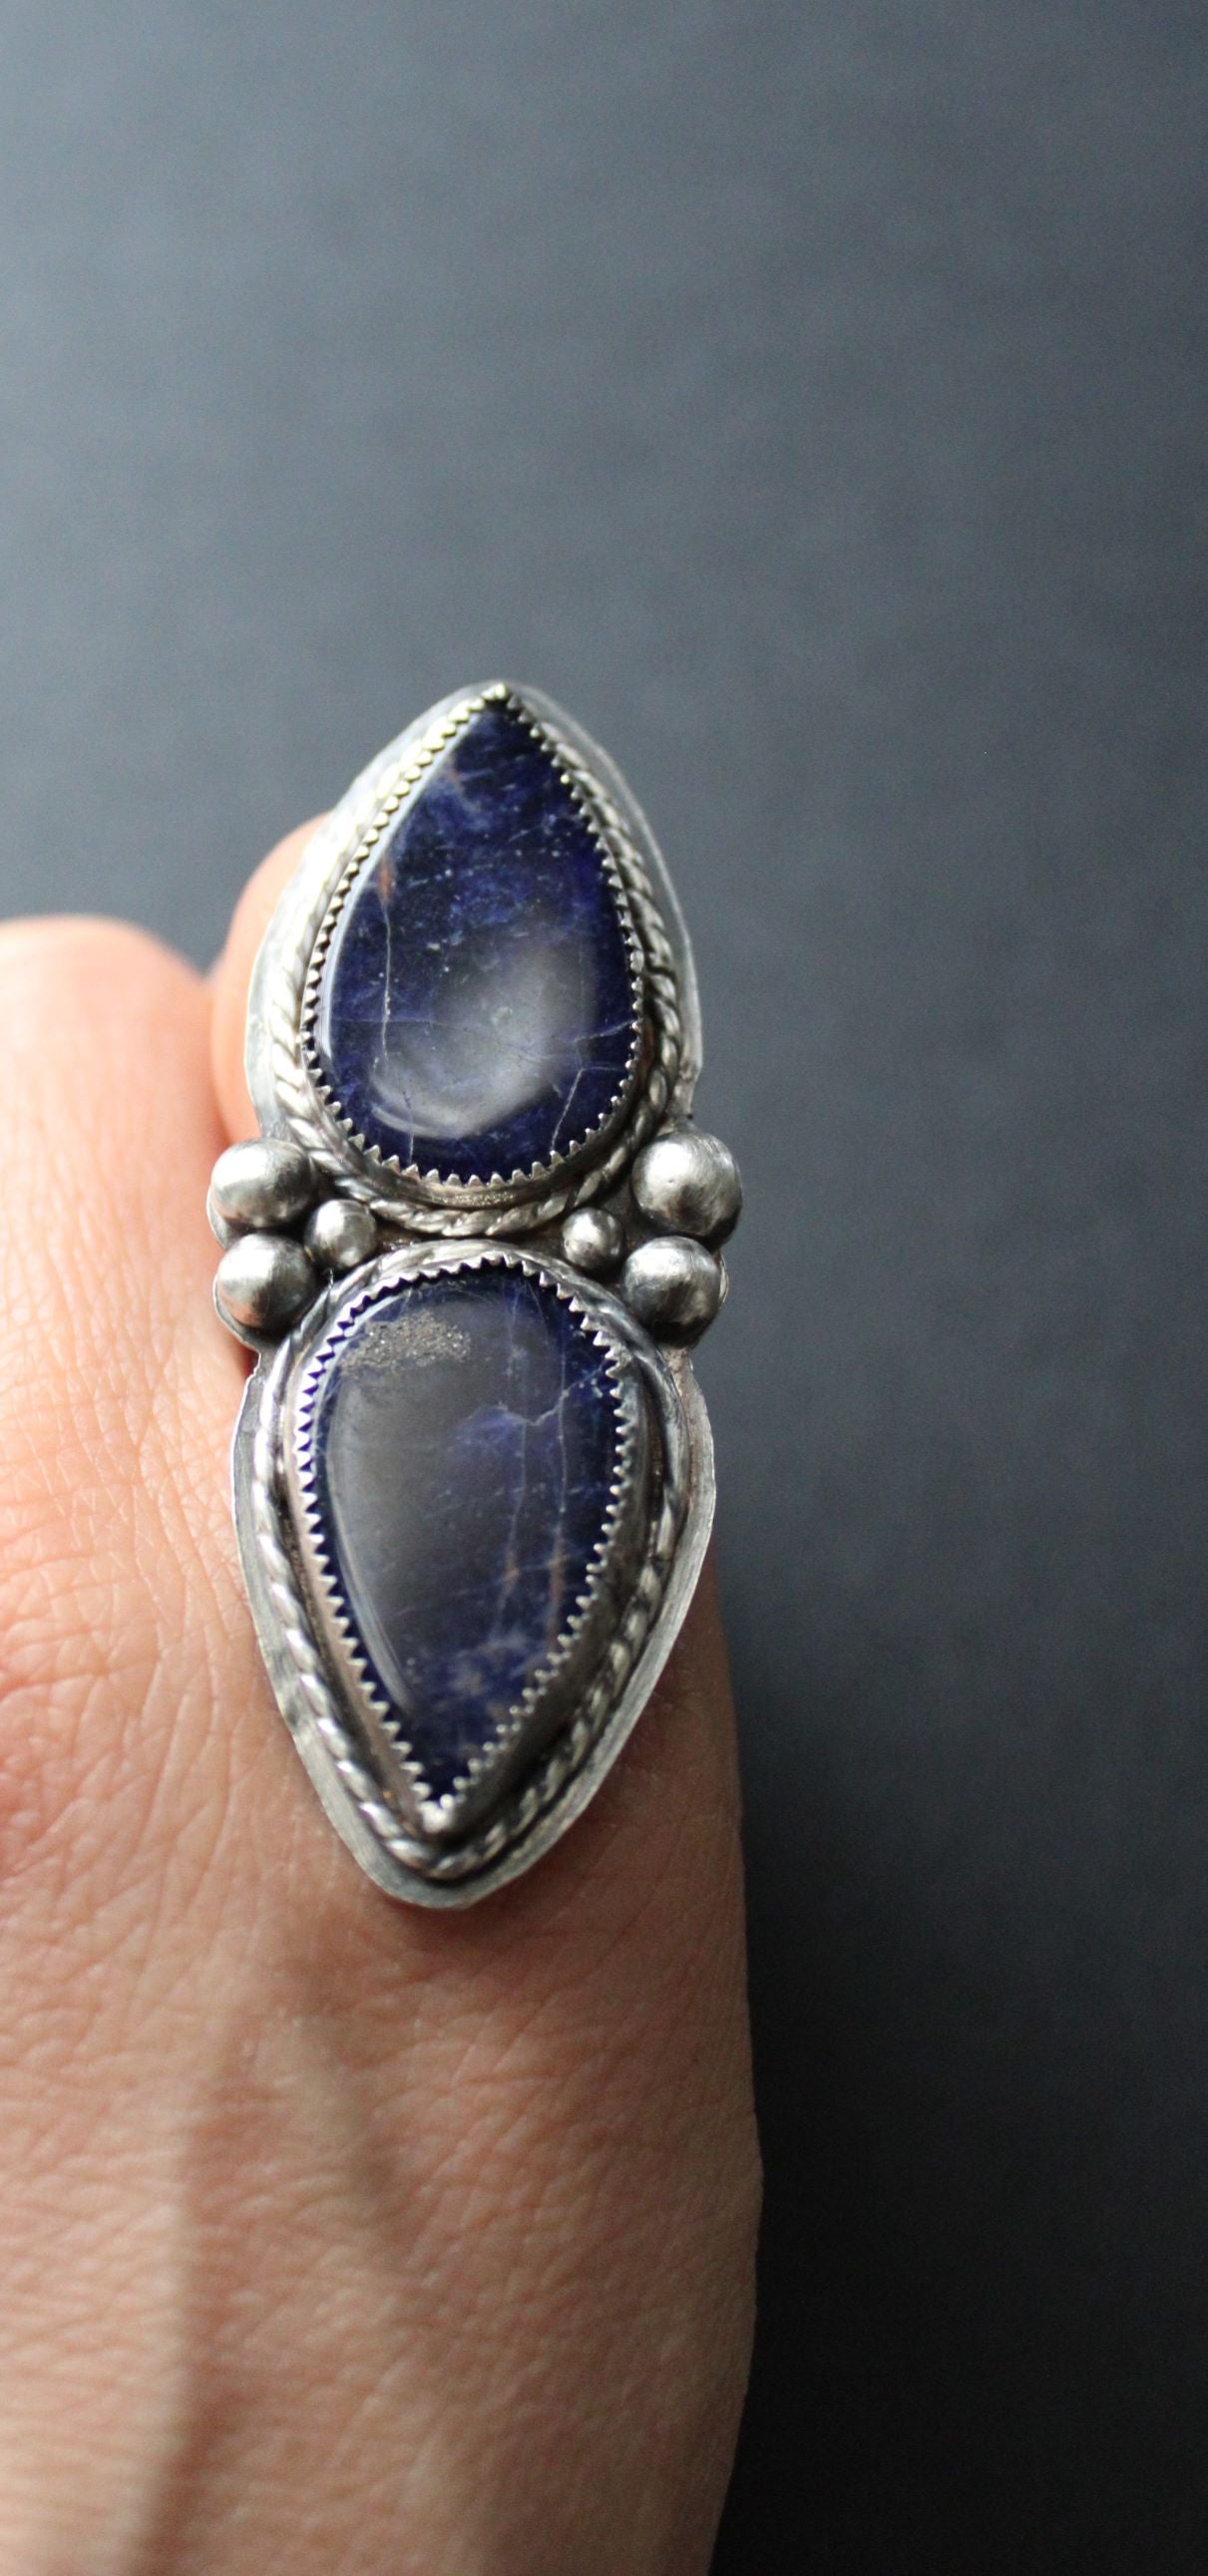 Vintage Style Sterling Silver and Sodalite Gemstone Ring, size 9